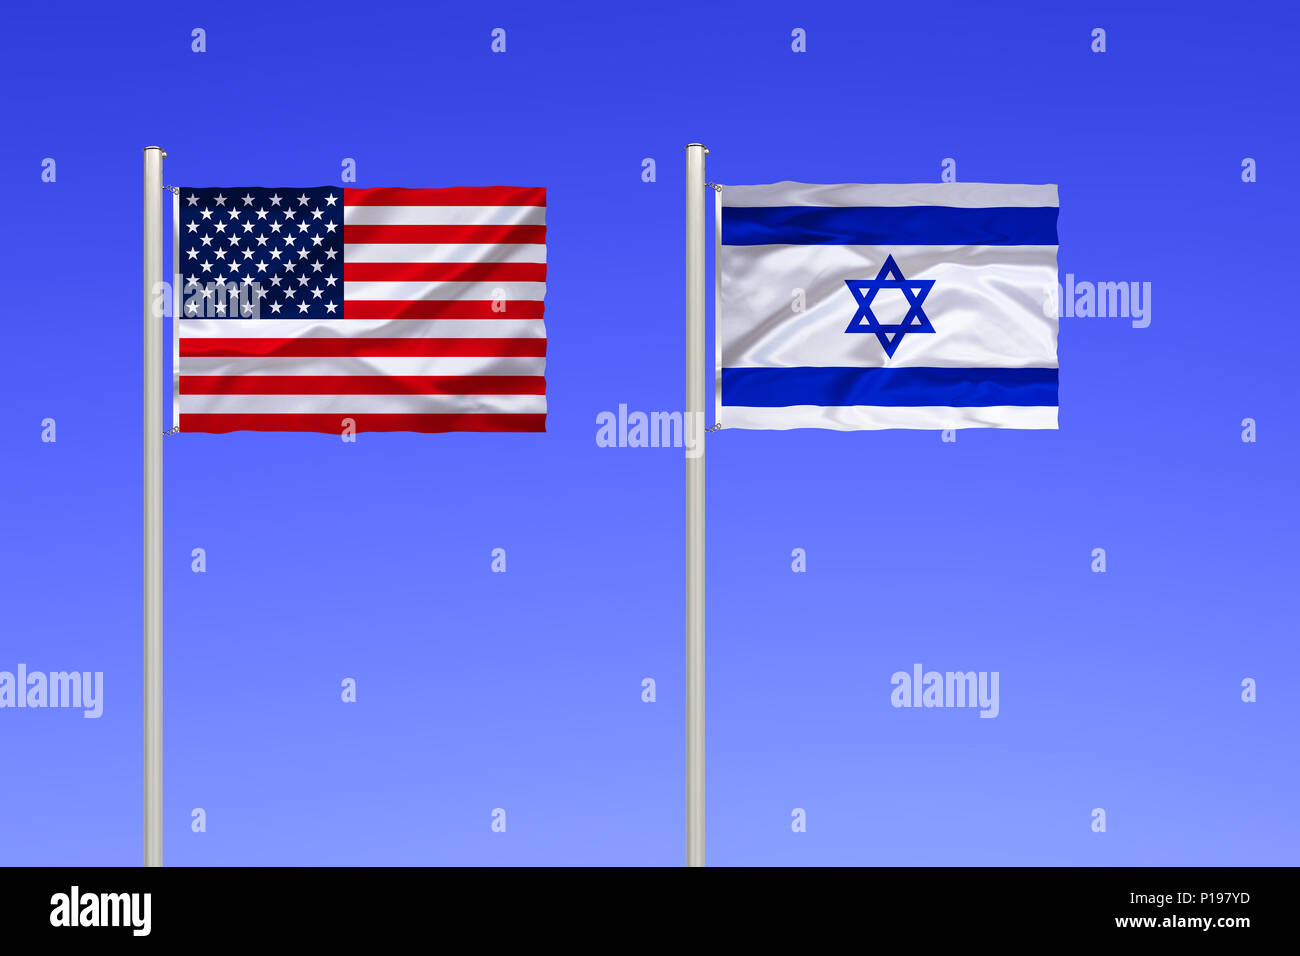 Flag of USA and Israel, Jerusalem, the Middle East, the Holy Land,, Flagge von USA und Israel, Naher Osten, Heiliges Land, Stock Photo